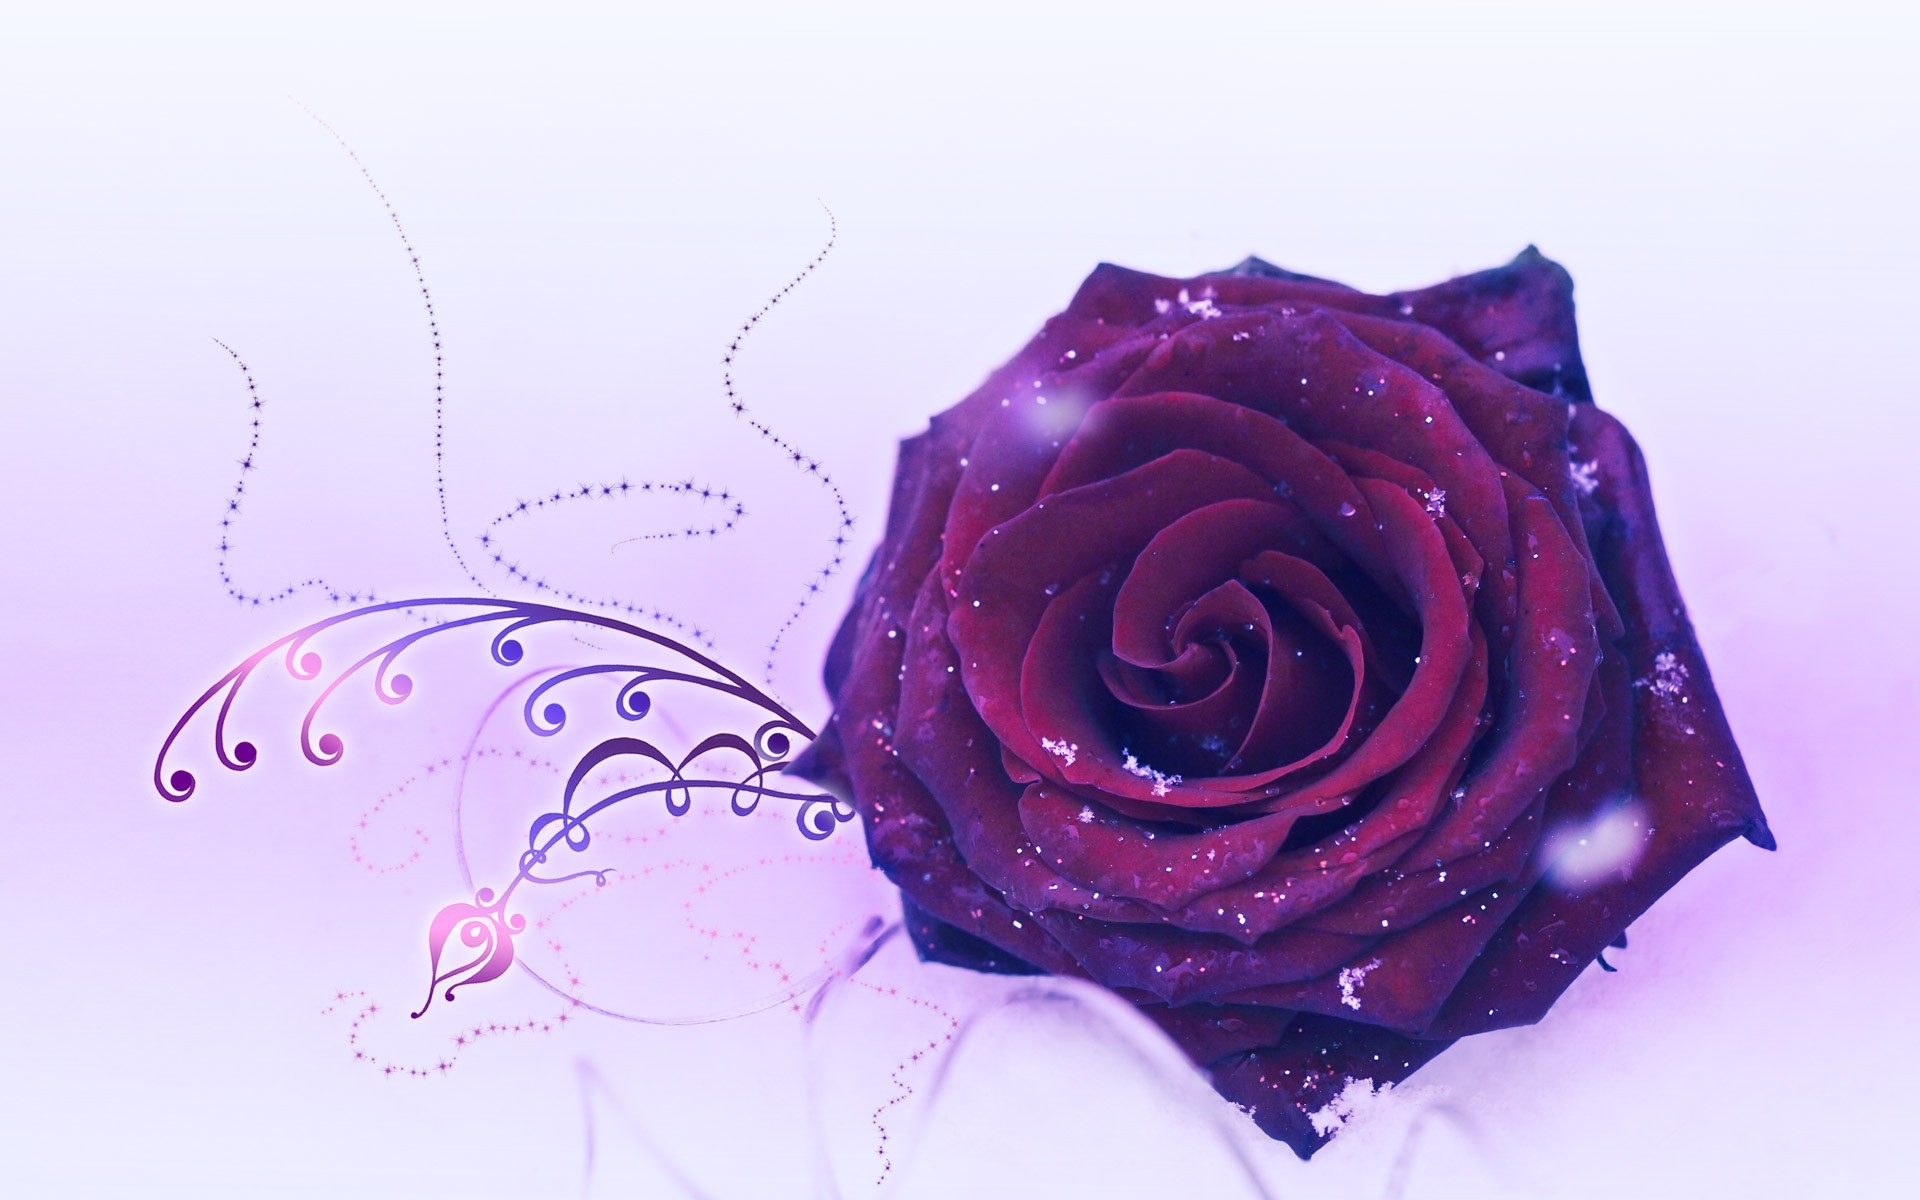 most beautiful images of purple roses